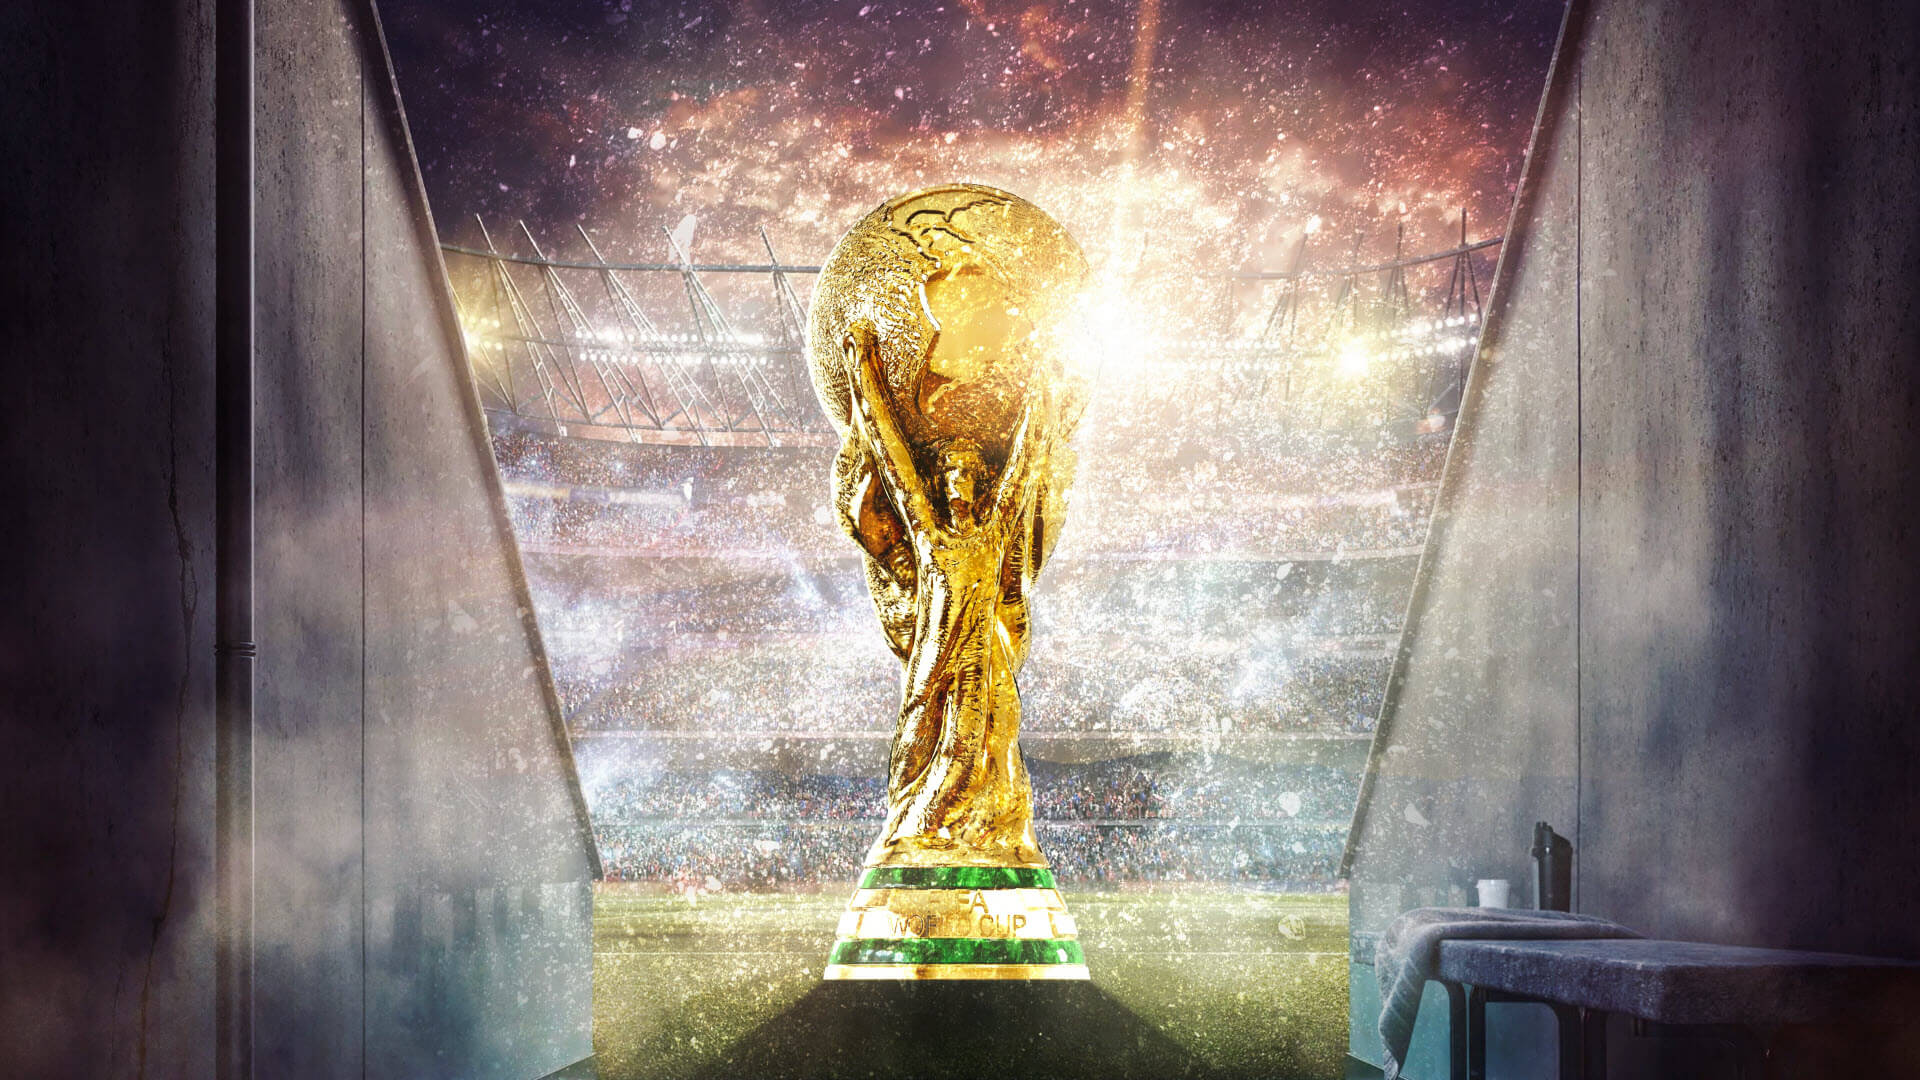 FIFA World Cup 2022 scams Beware of fake lotteries, ticket fraud and other cons